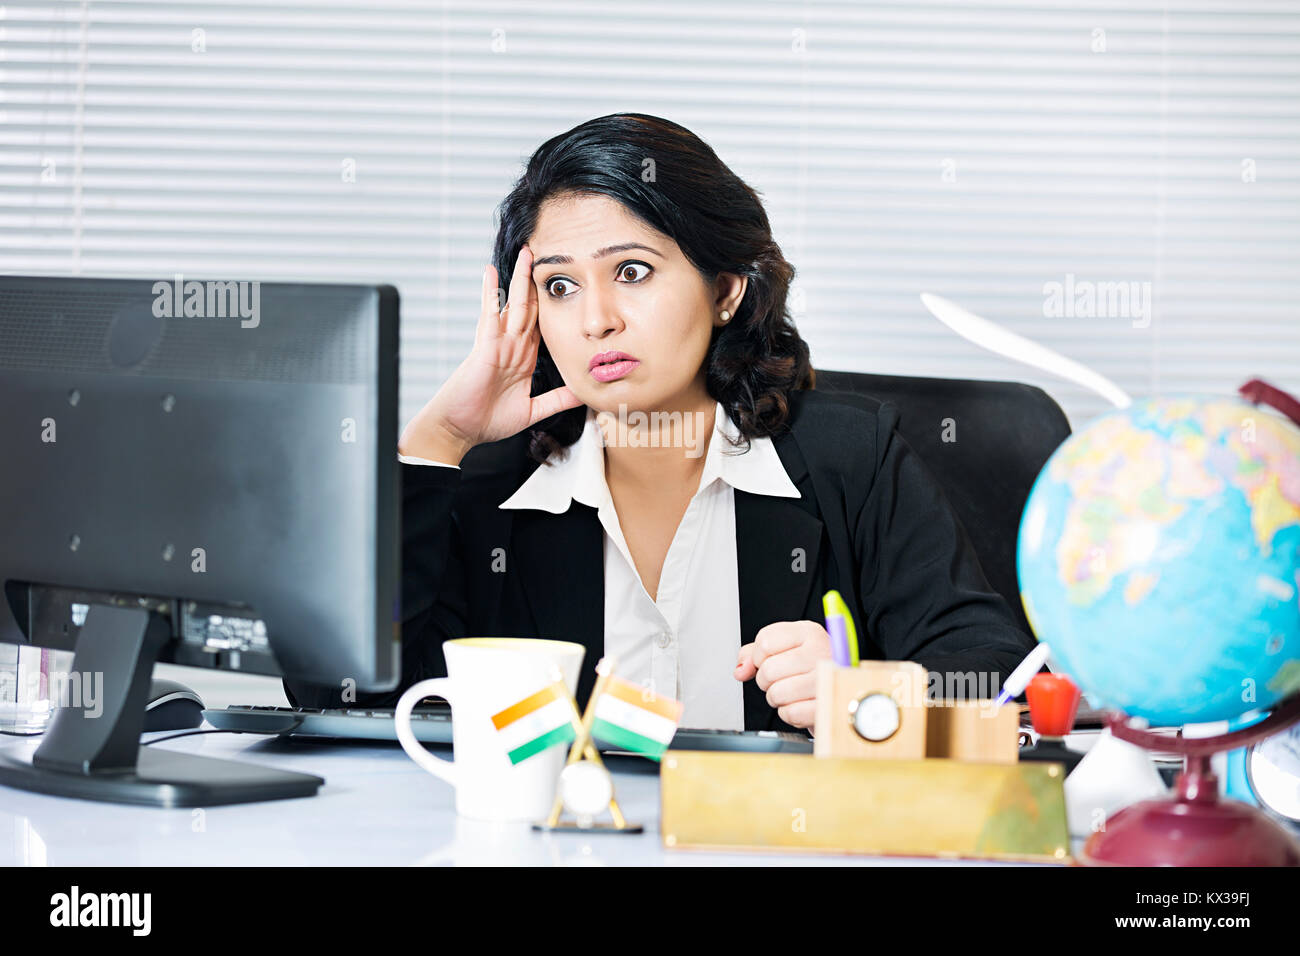 Serious 1 Business woman Manager Watching Computer Badnews Stock Photo